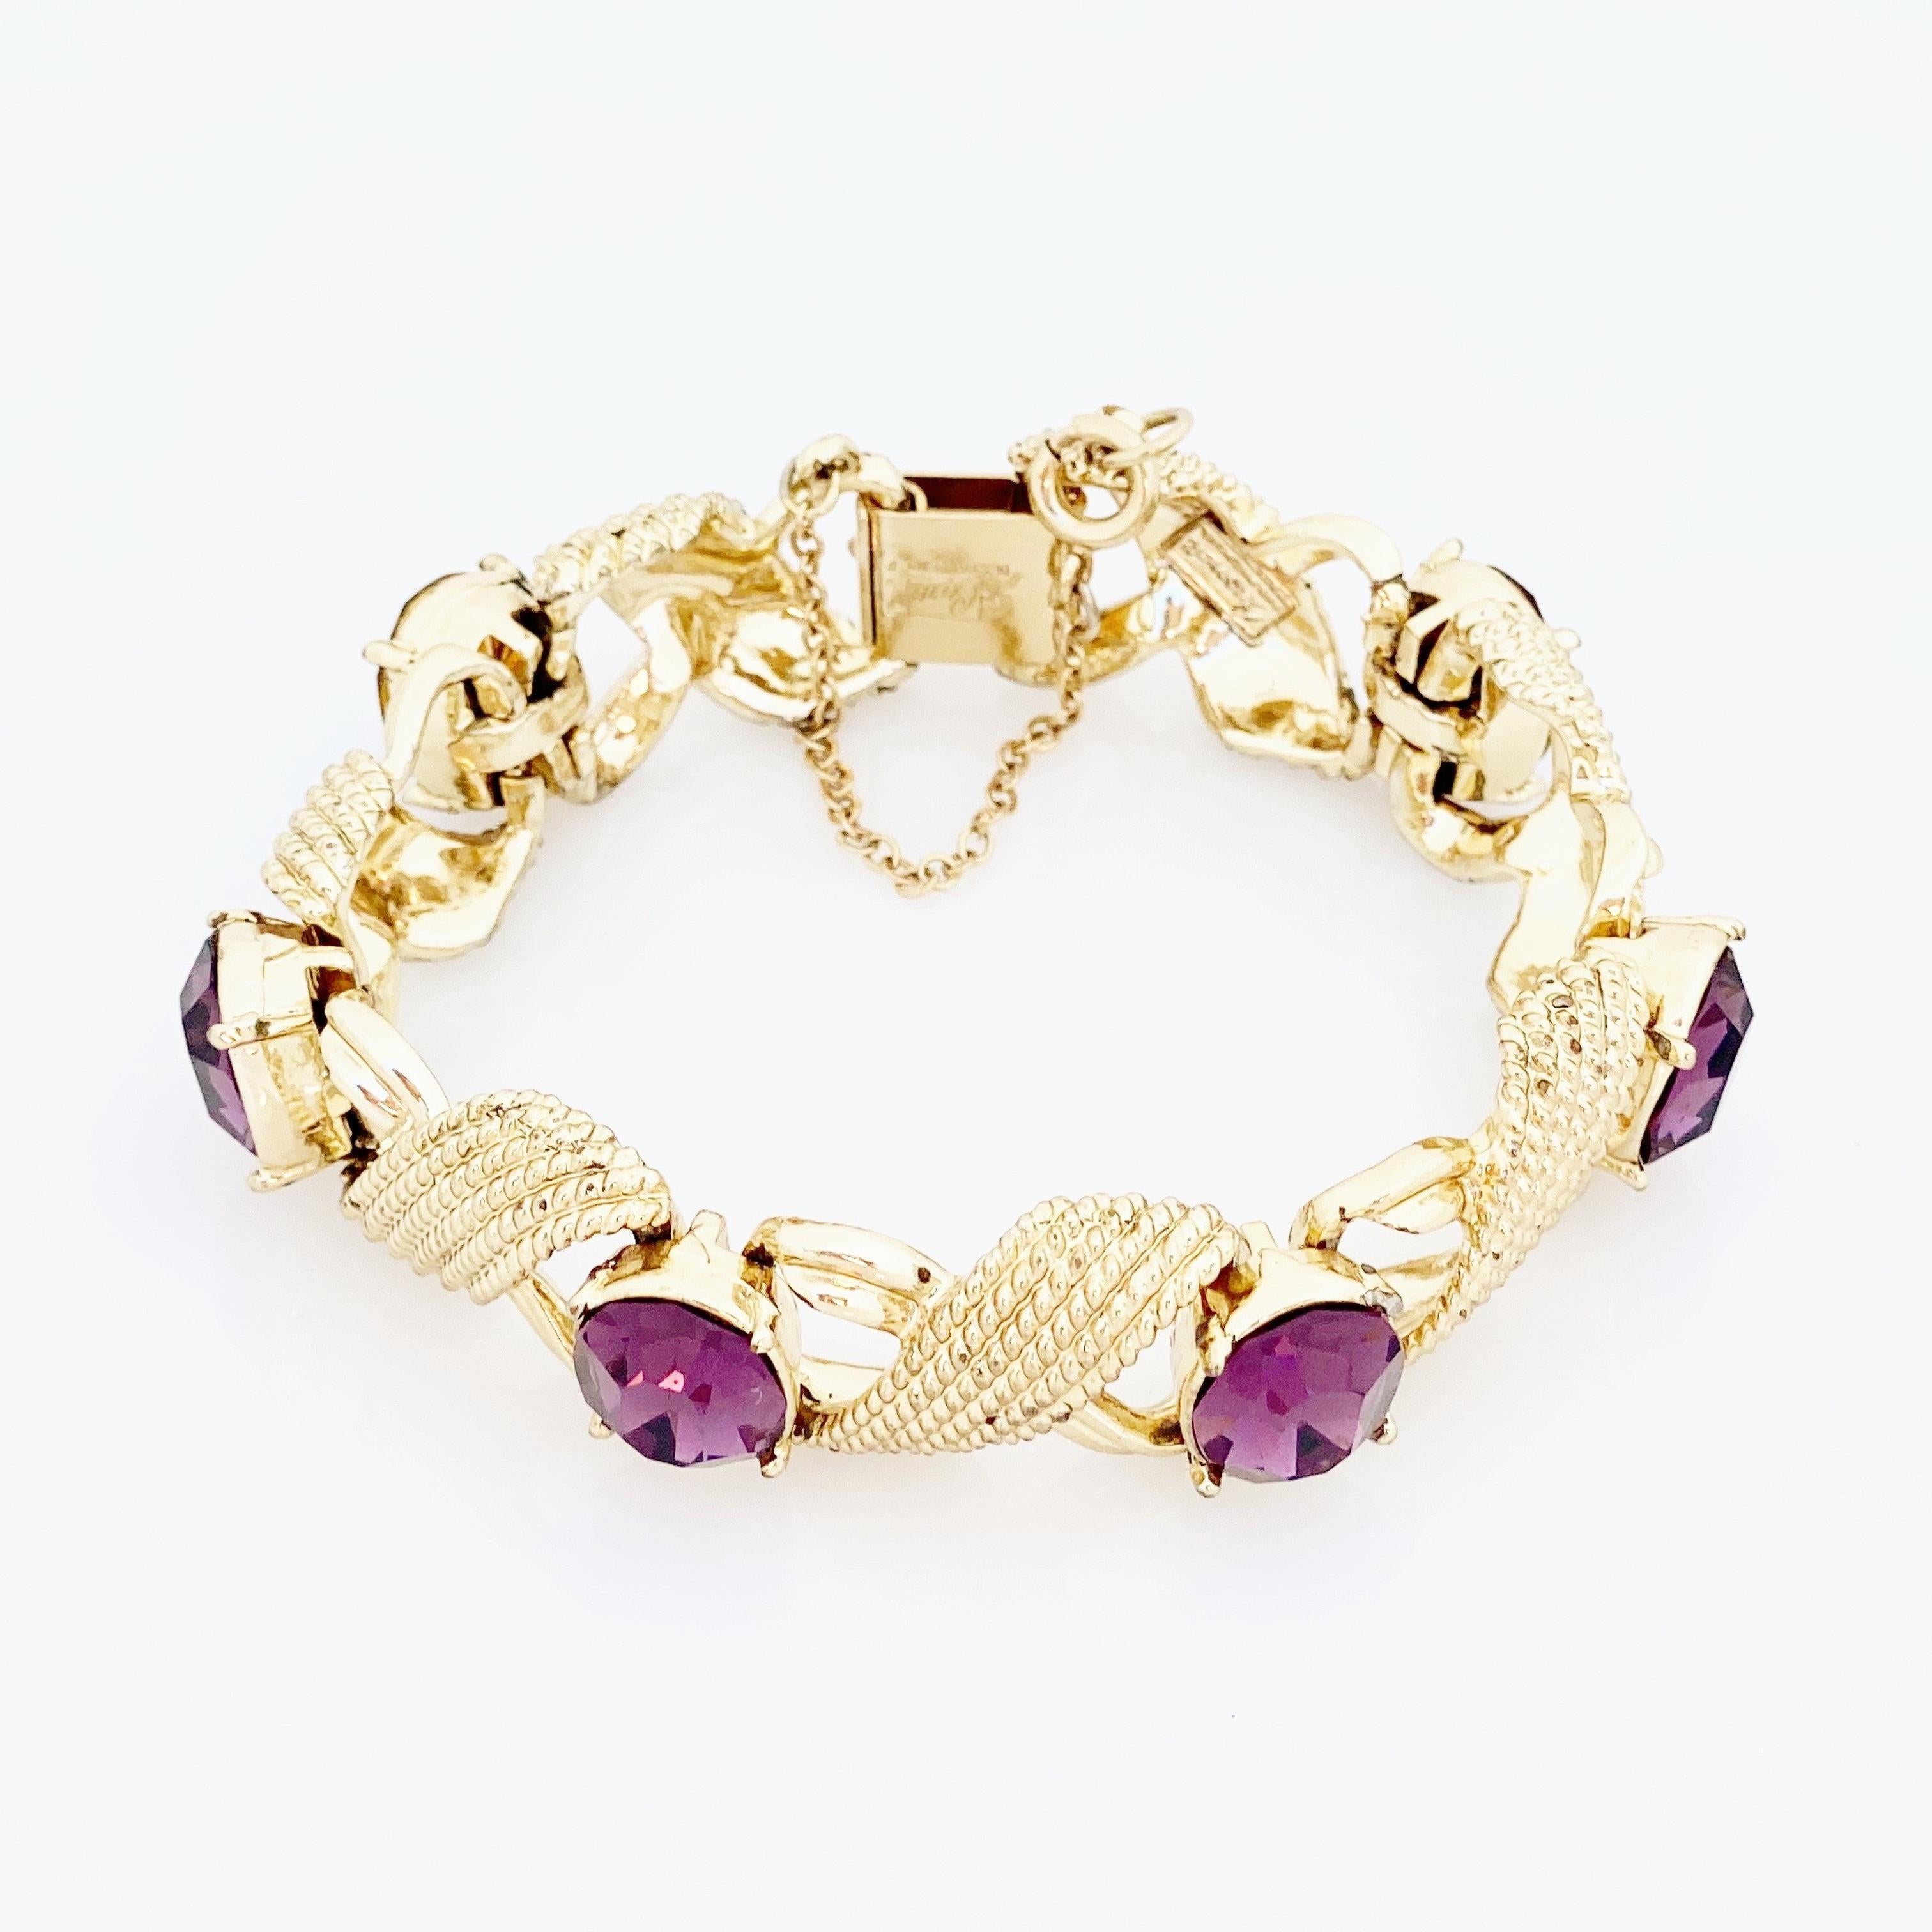 Women's Gold Bracelet With Purple Crystals By Corocraft, 1950s